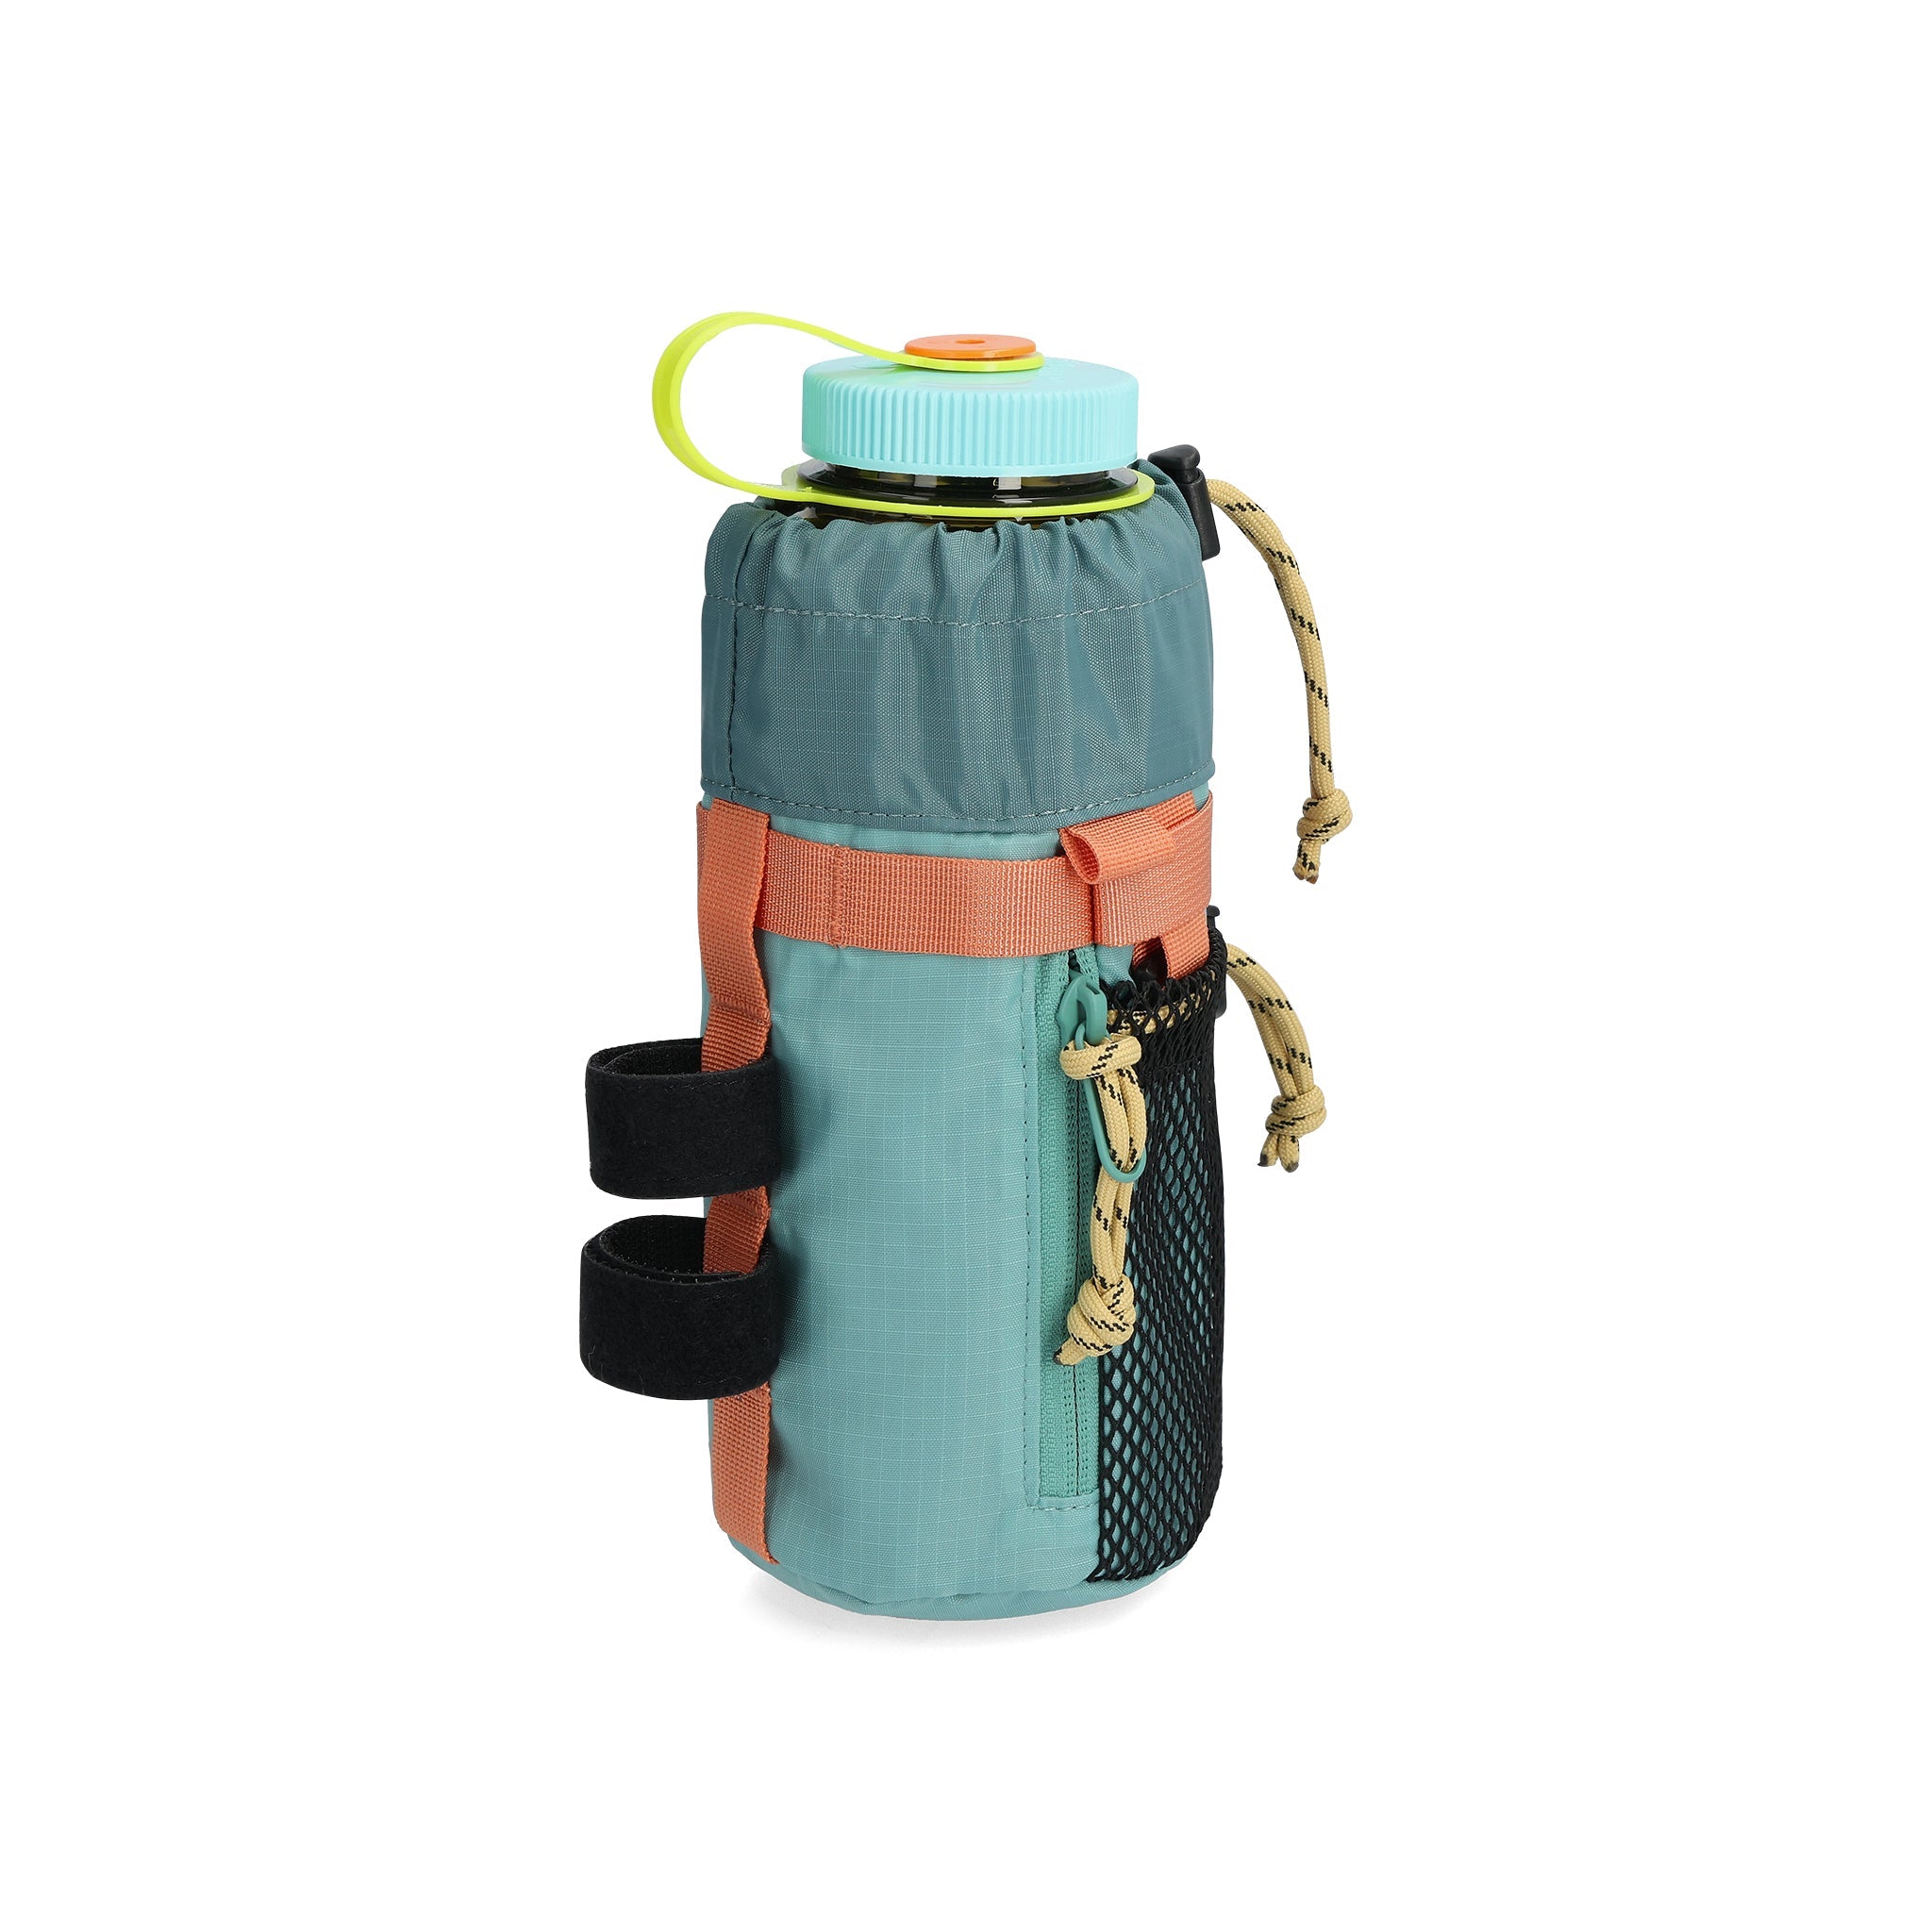 Front View of Topo Designs Mountain Hydro Sling in "Geode Green"